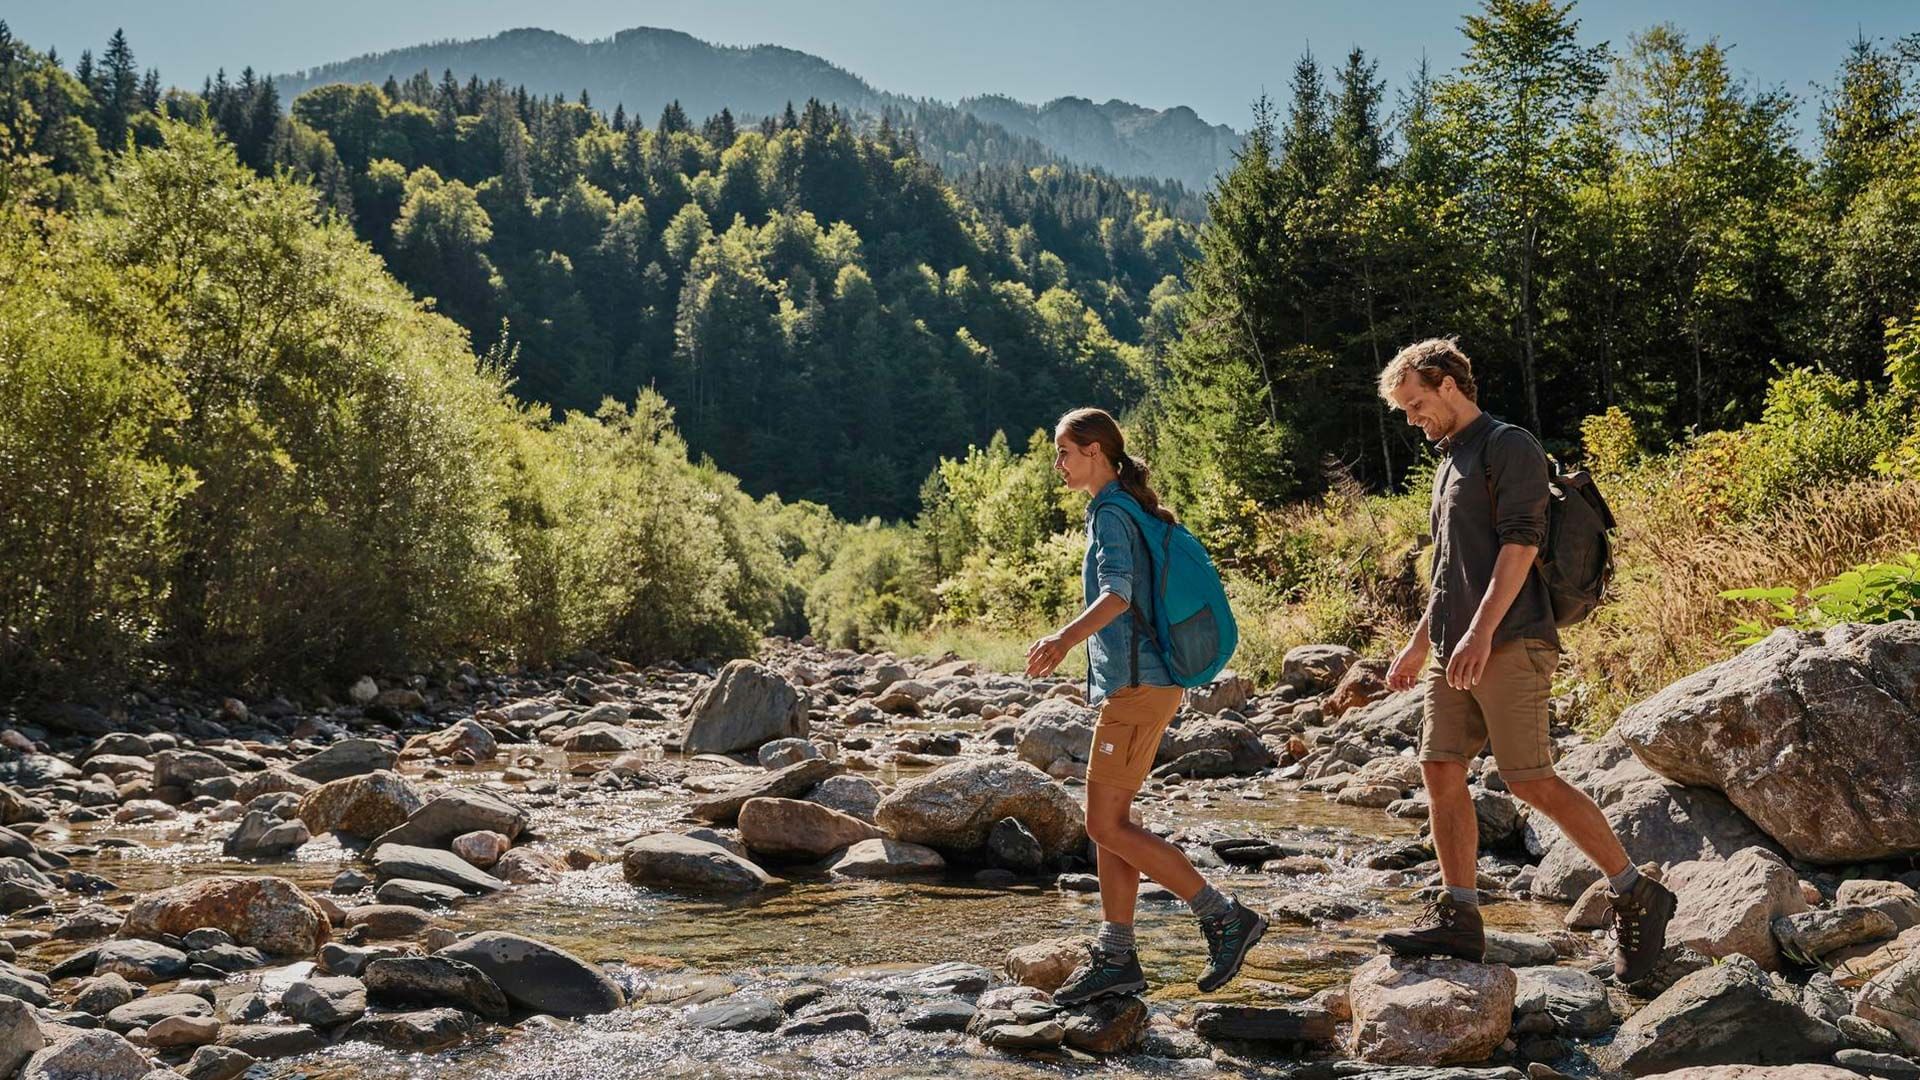 Hiking couple wading across a rocky river, Falkensteiner Hotels